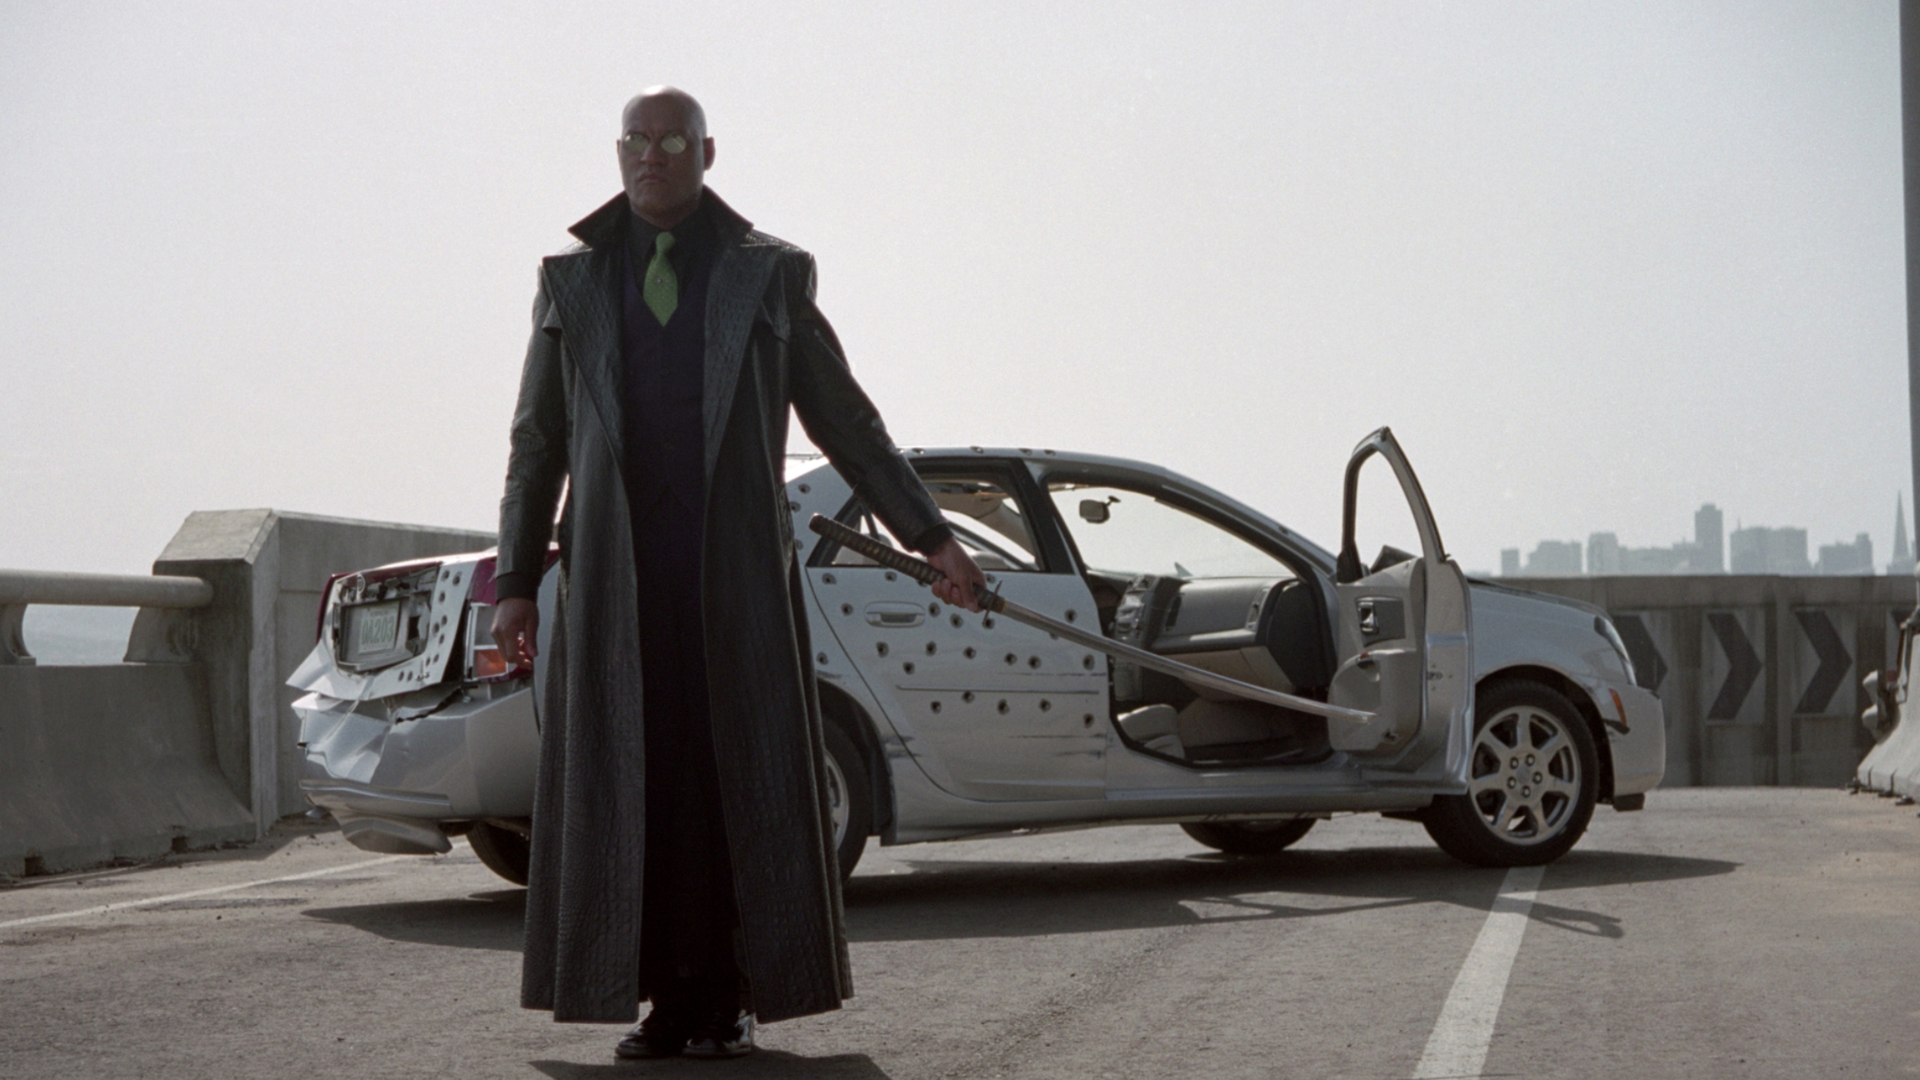 A still from The Matrix Reloaded movie.  Here we see Morpheus, a man wearing a long black trench coat, green tie and reflective sunglasses, set out of a white, bullet-ridden car as he holds out a samurai sword.